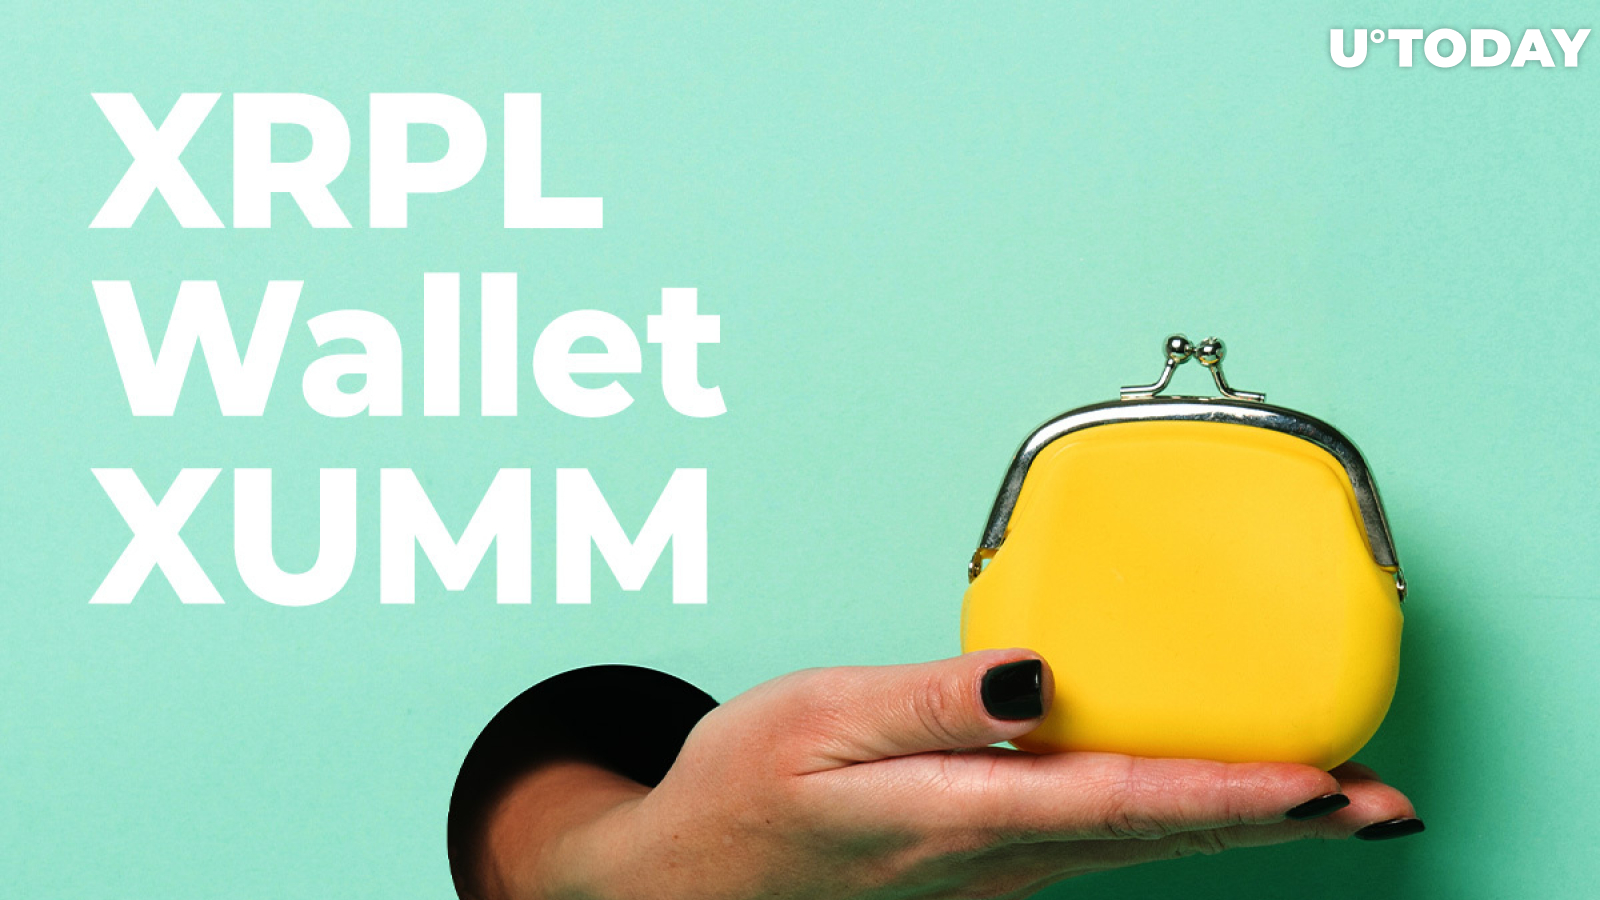 XRPL Wallet XUMM Adds dApps and NFT Modules for the First Time Ever